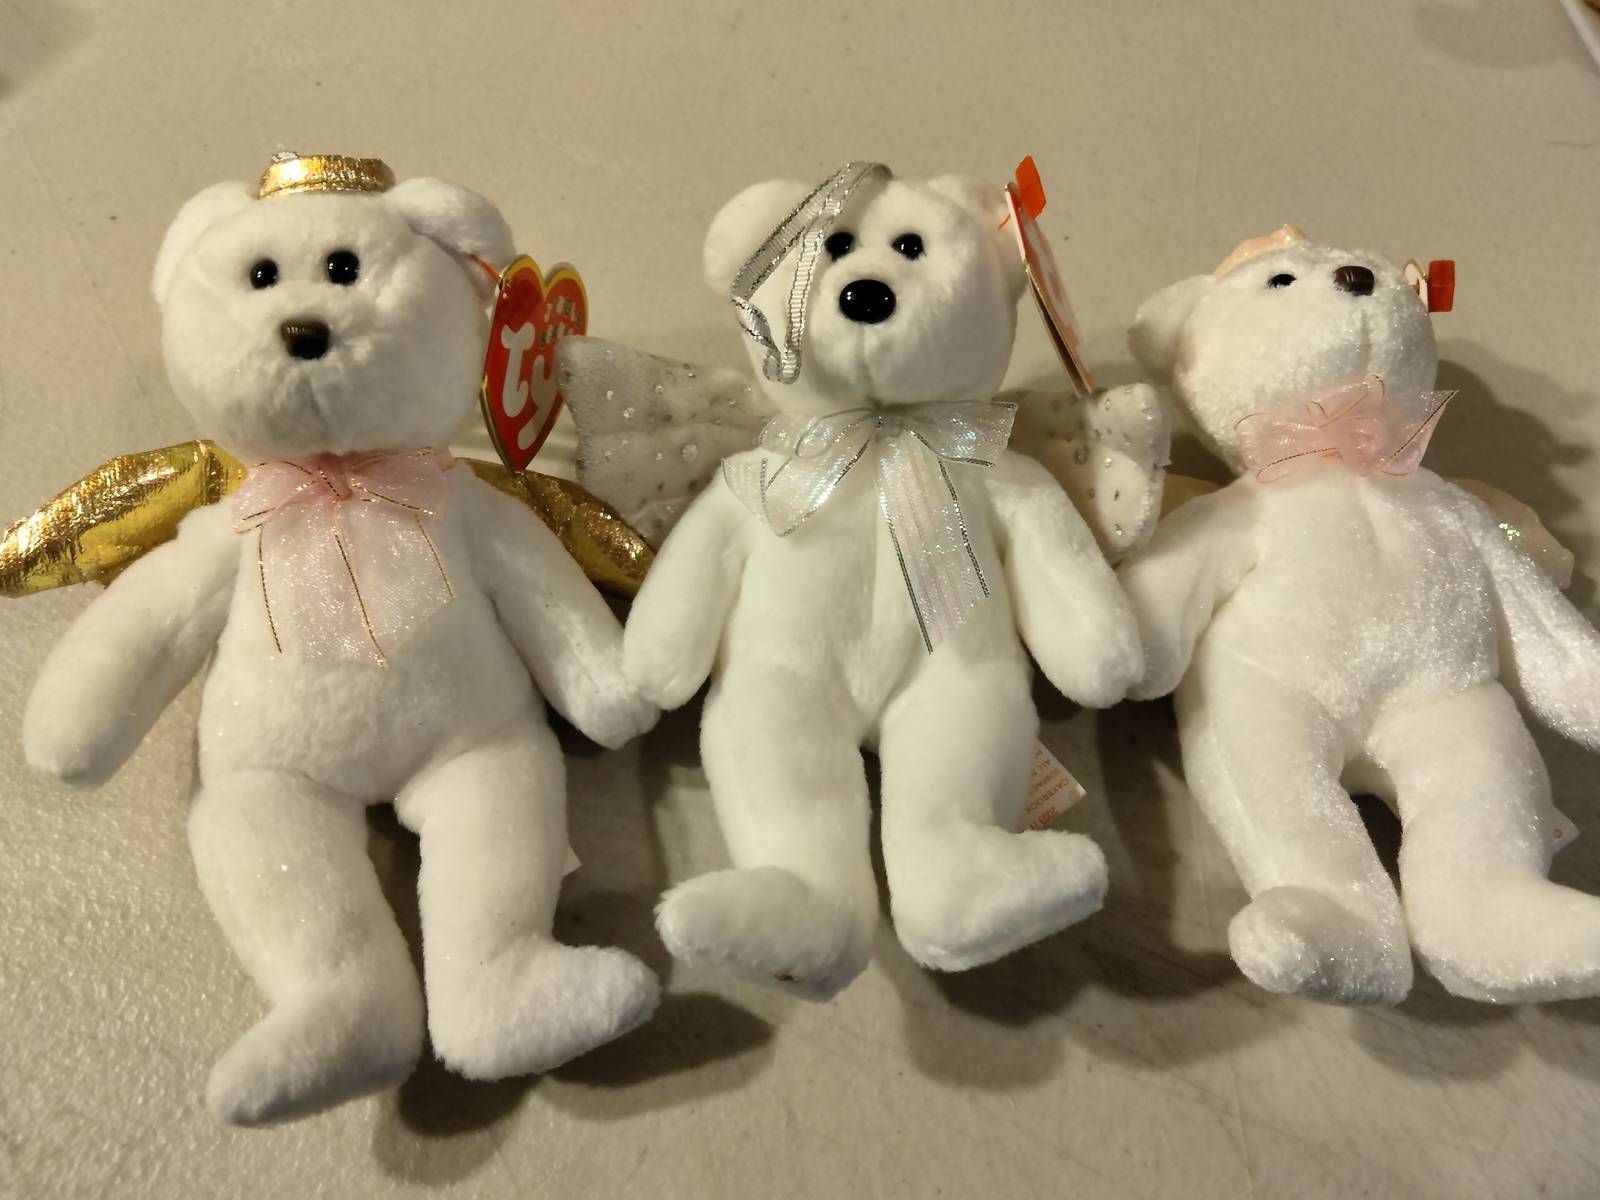 Primary image for Ty Christmas Ornament Jingle Beanies Winged Angel White Bears Halo, Halo 2, and 